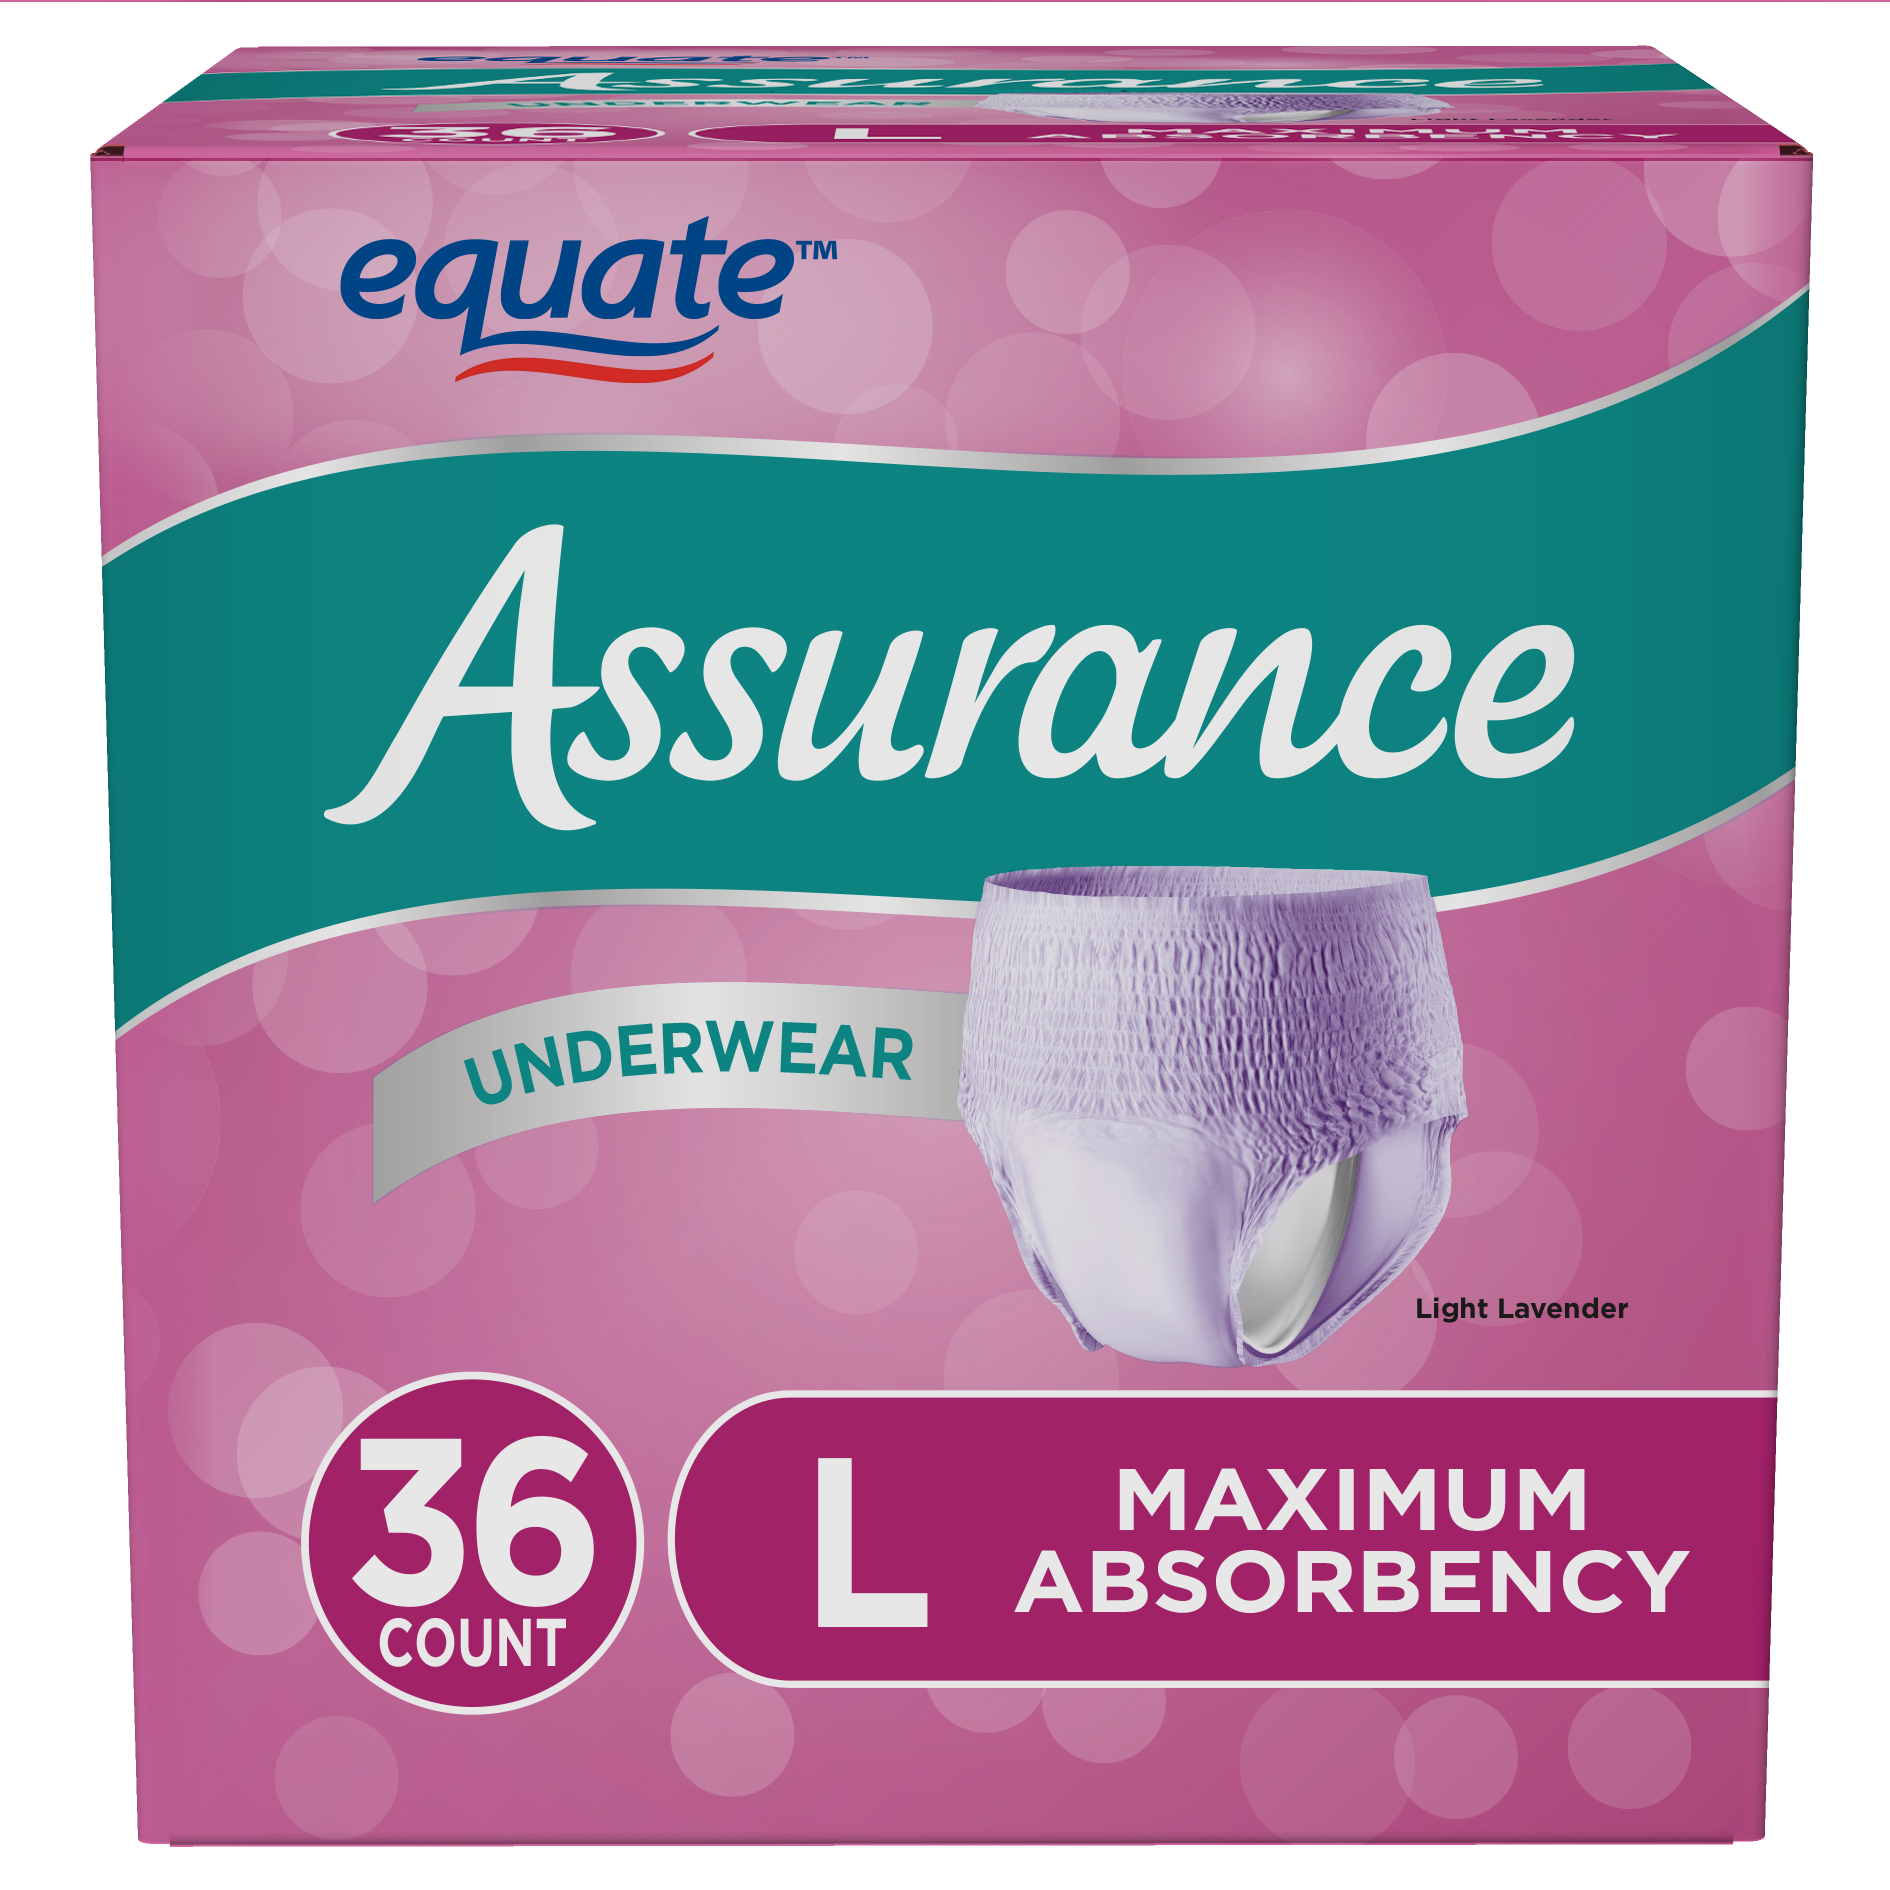 Assurance Women's Incontinence & Postpartum Underwear, Maximum Absorbency, L (36 Count) - image 1 of 8